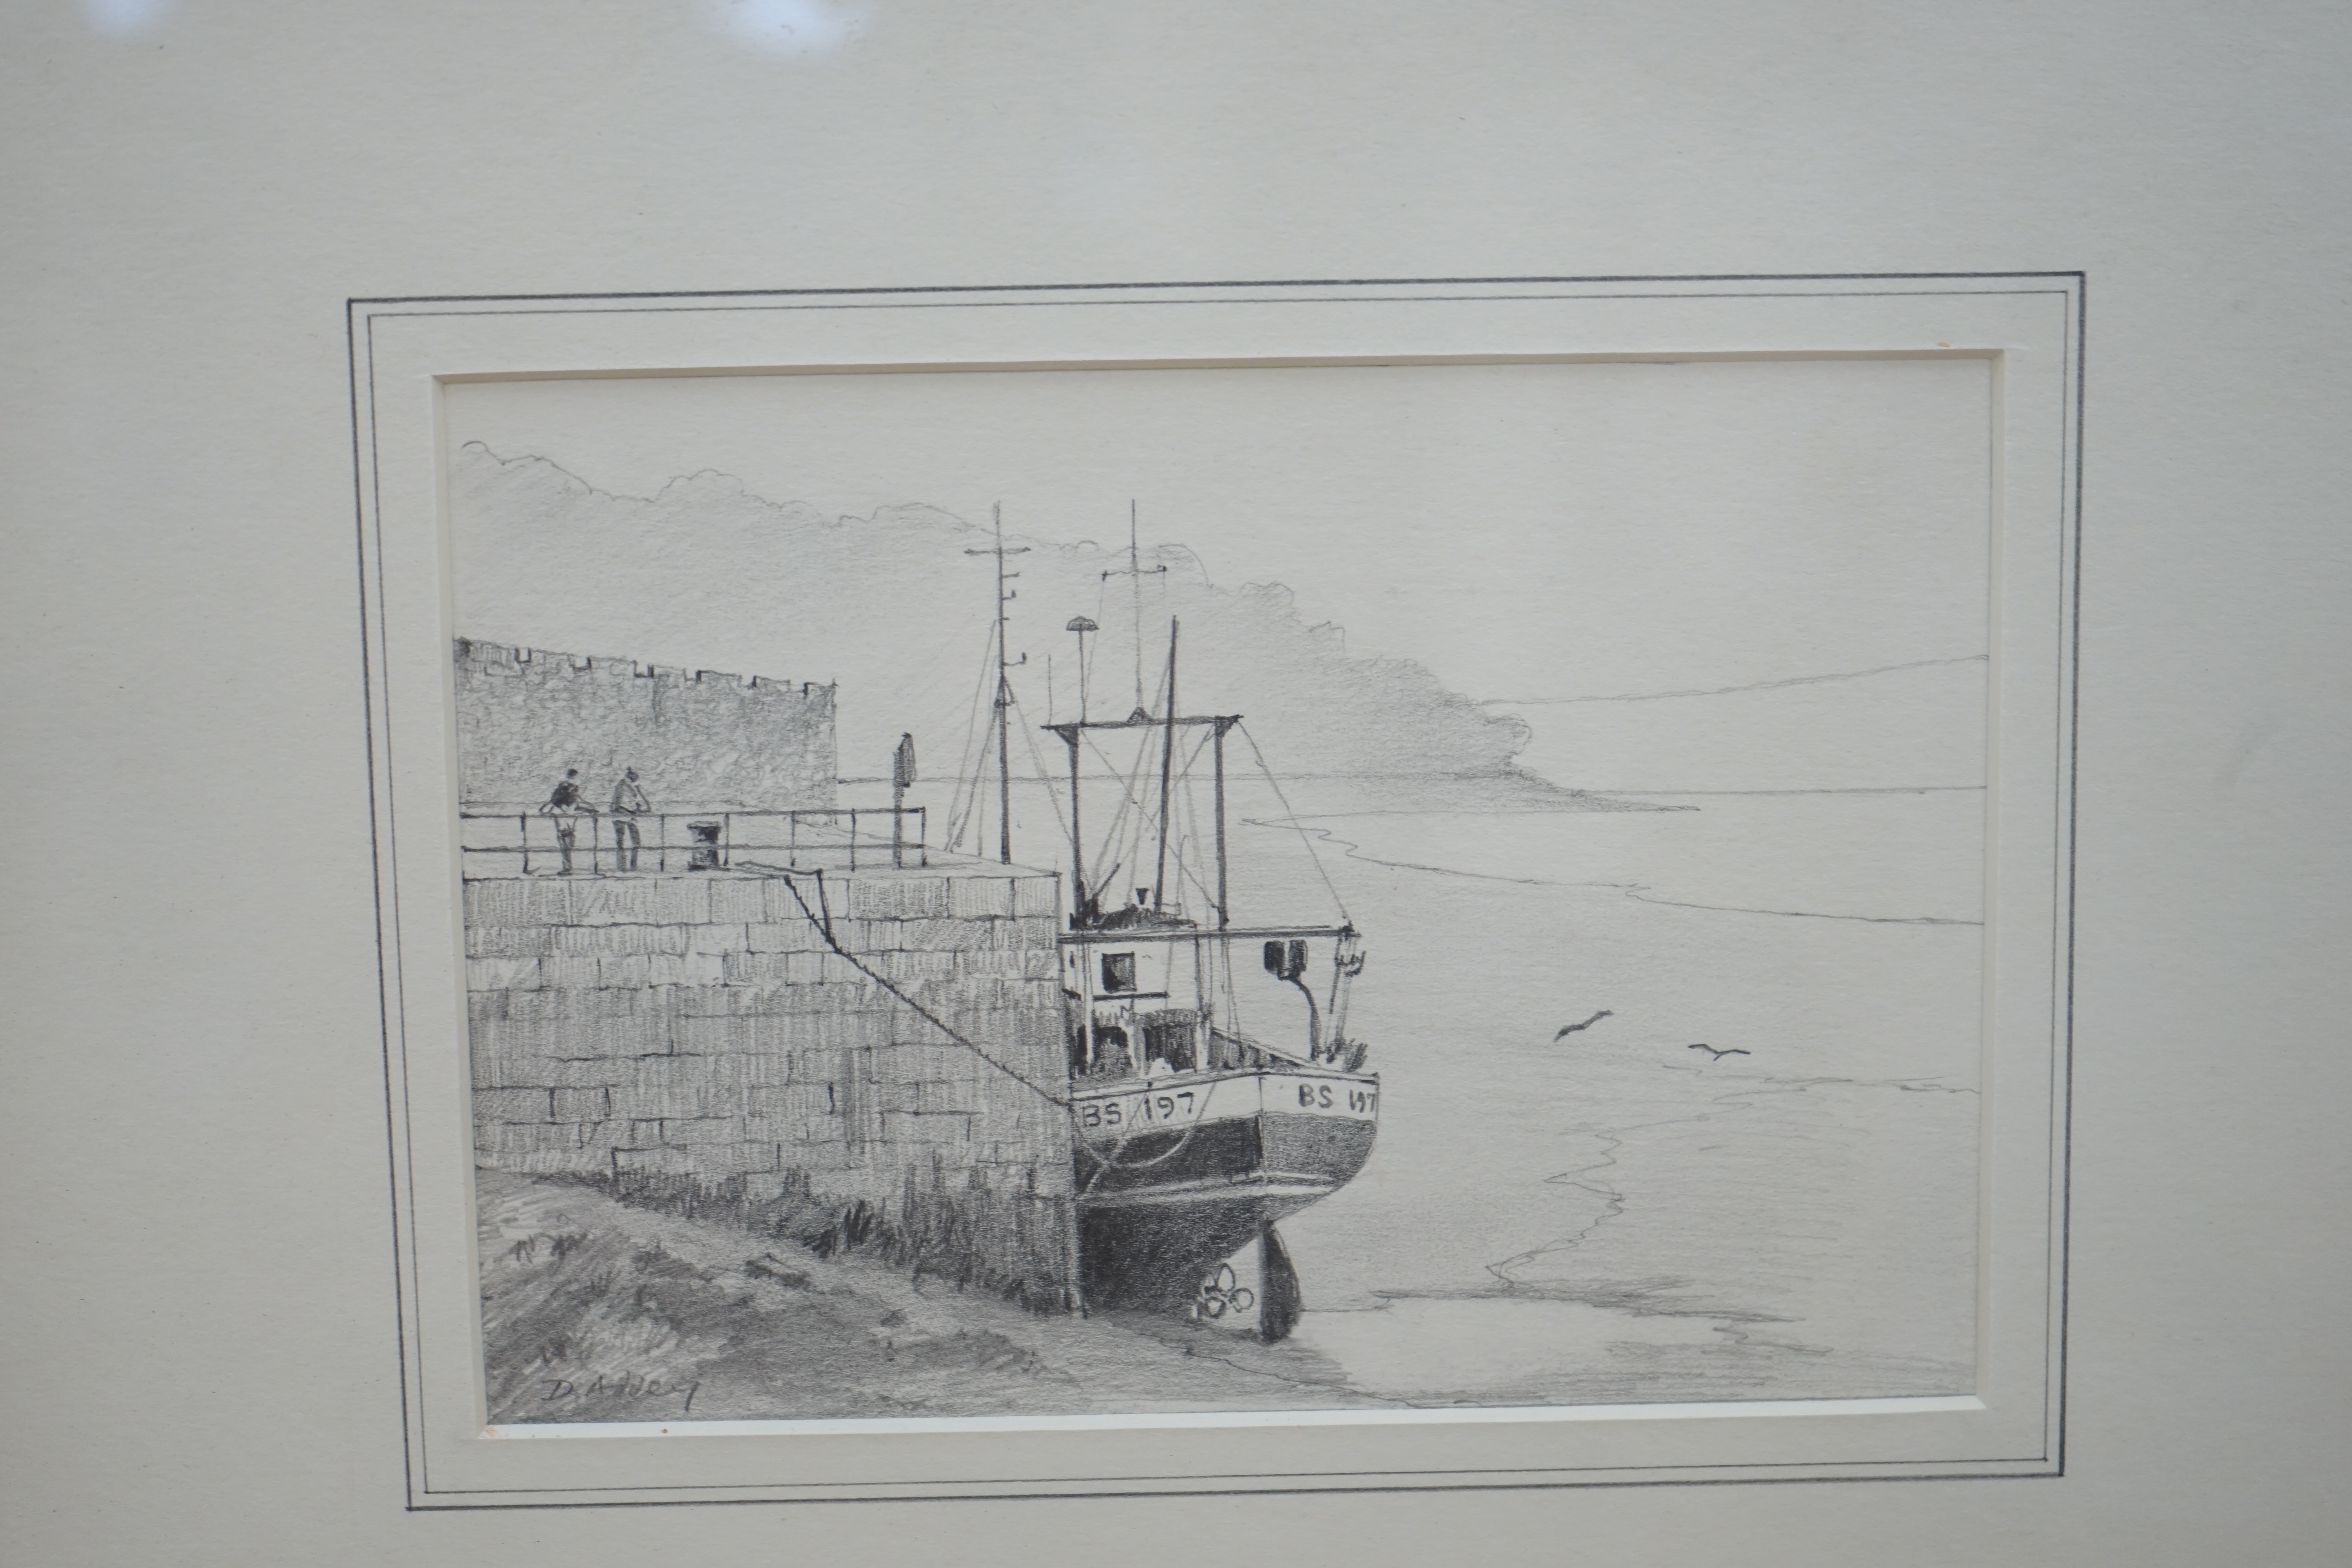 David Addey (b.1933), watercolour, View of a house, signed, together with a pair of pencil studies, Coastal views with fishing boats, largest 23 x 36cm. Condition - fair, some staining to the watercolour